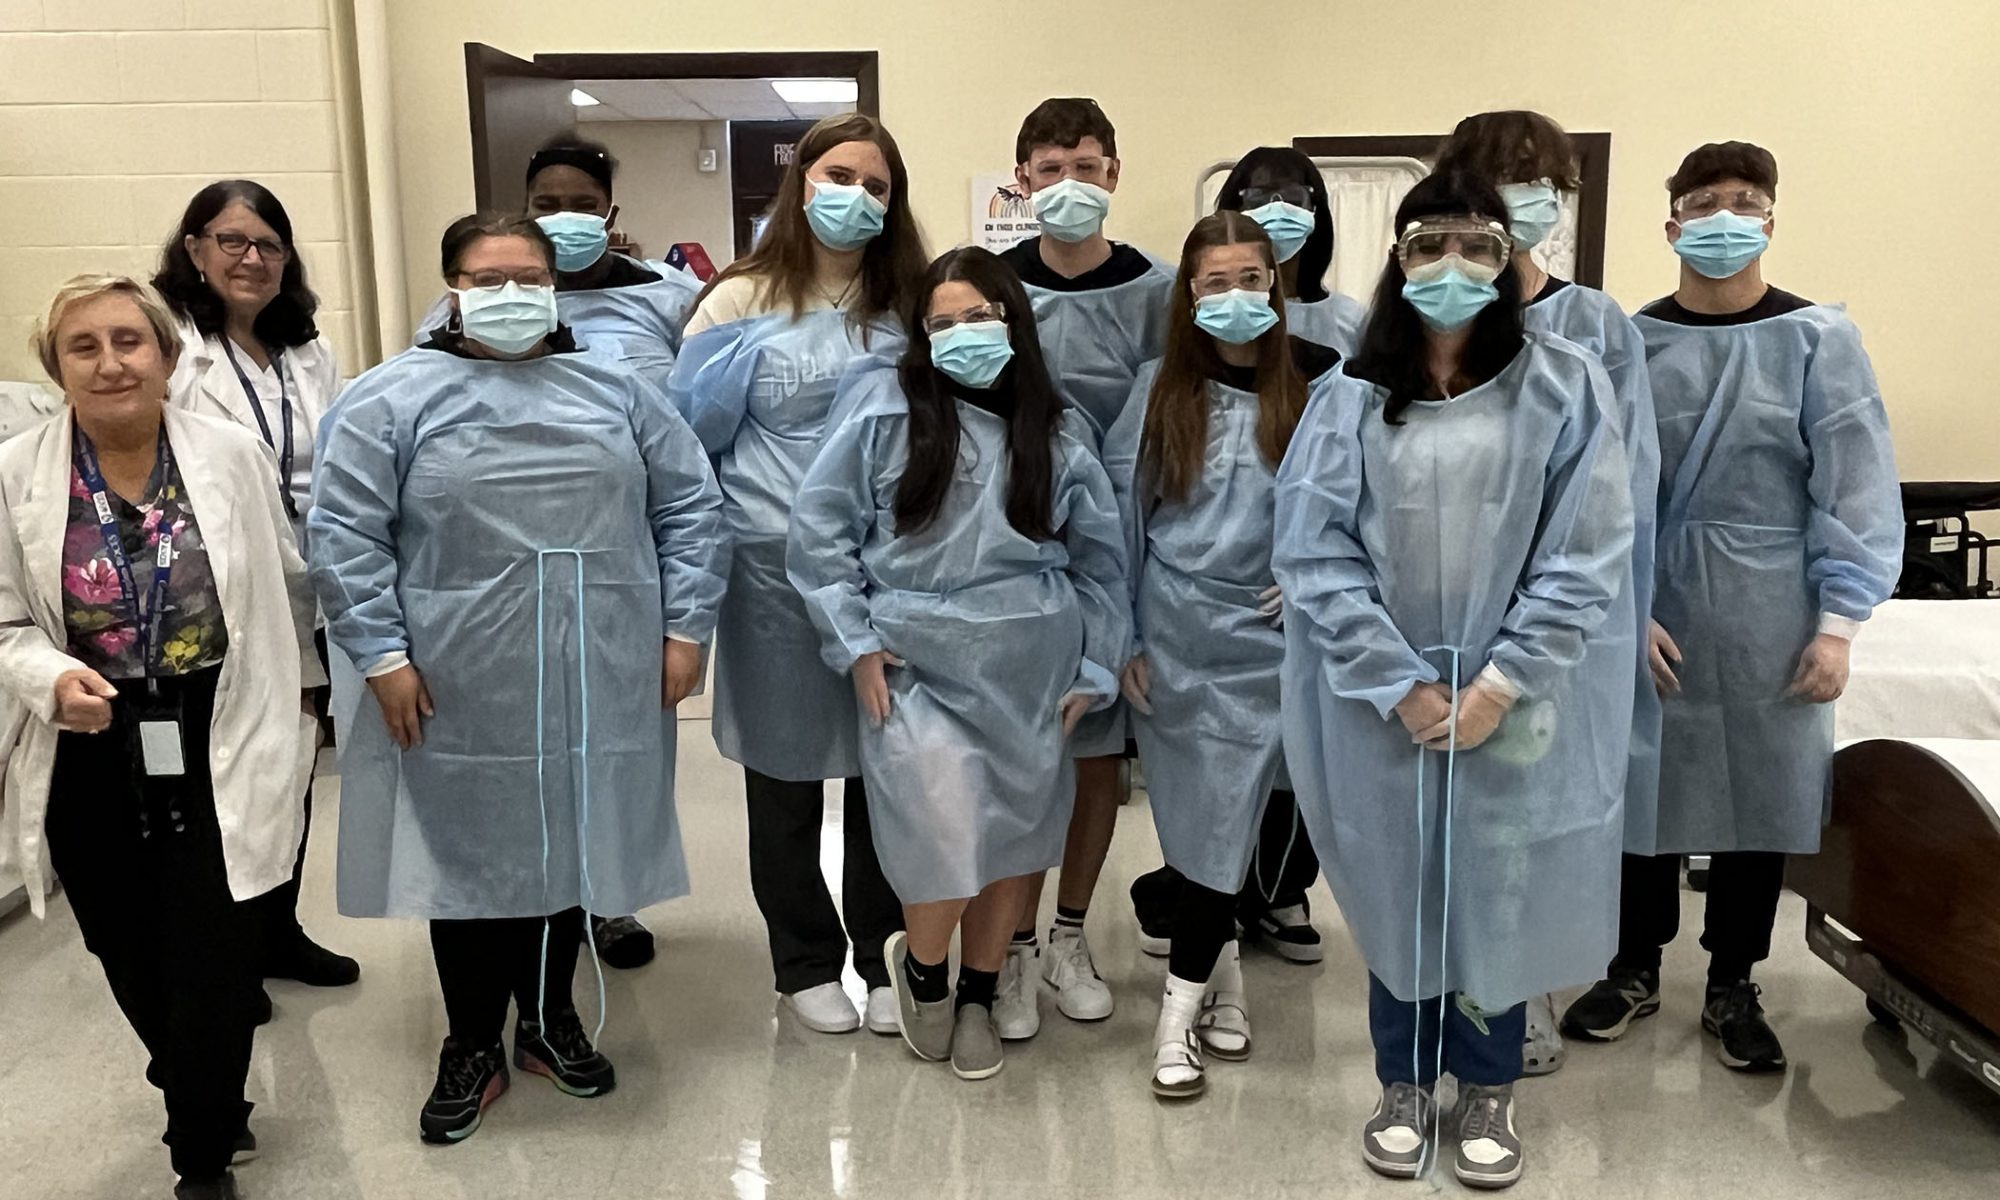 Ten students wearing smocks and surgical masks line up to pose for a picture